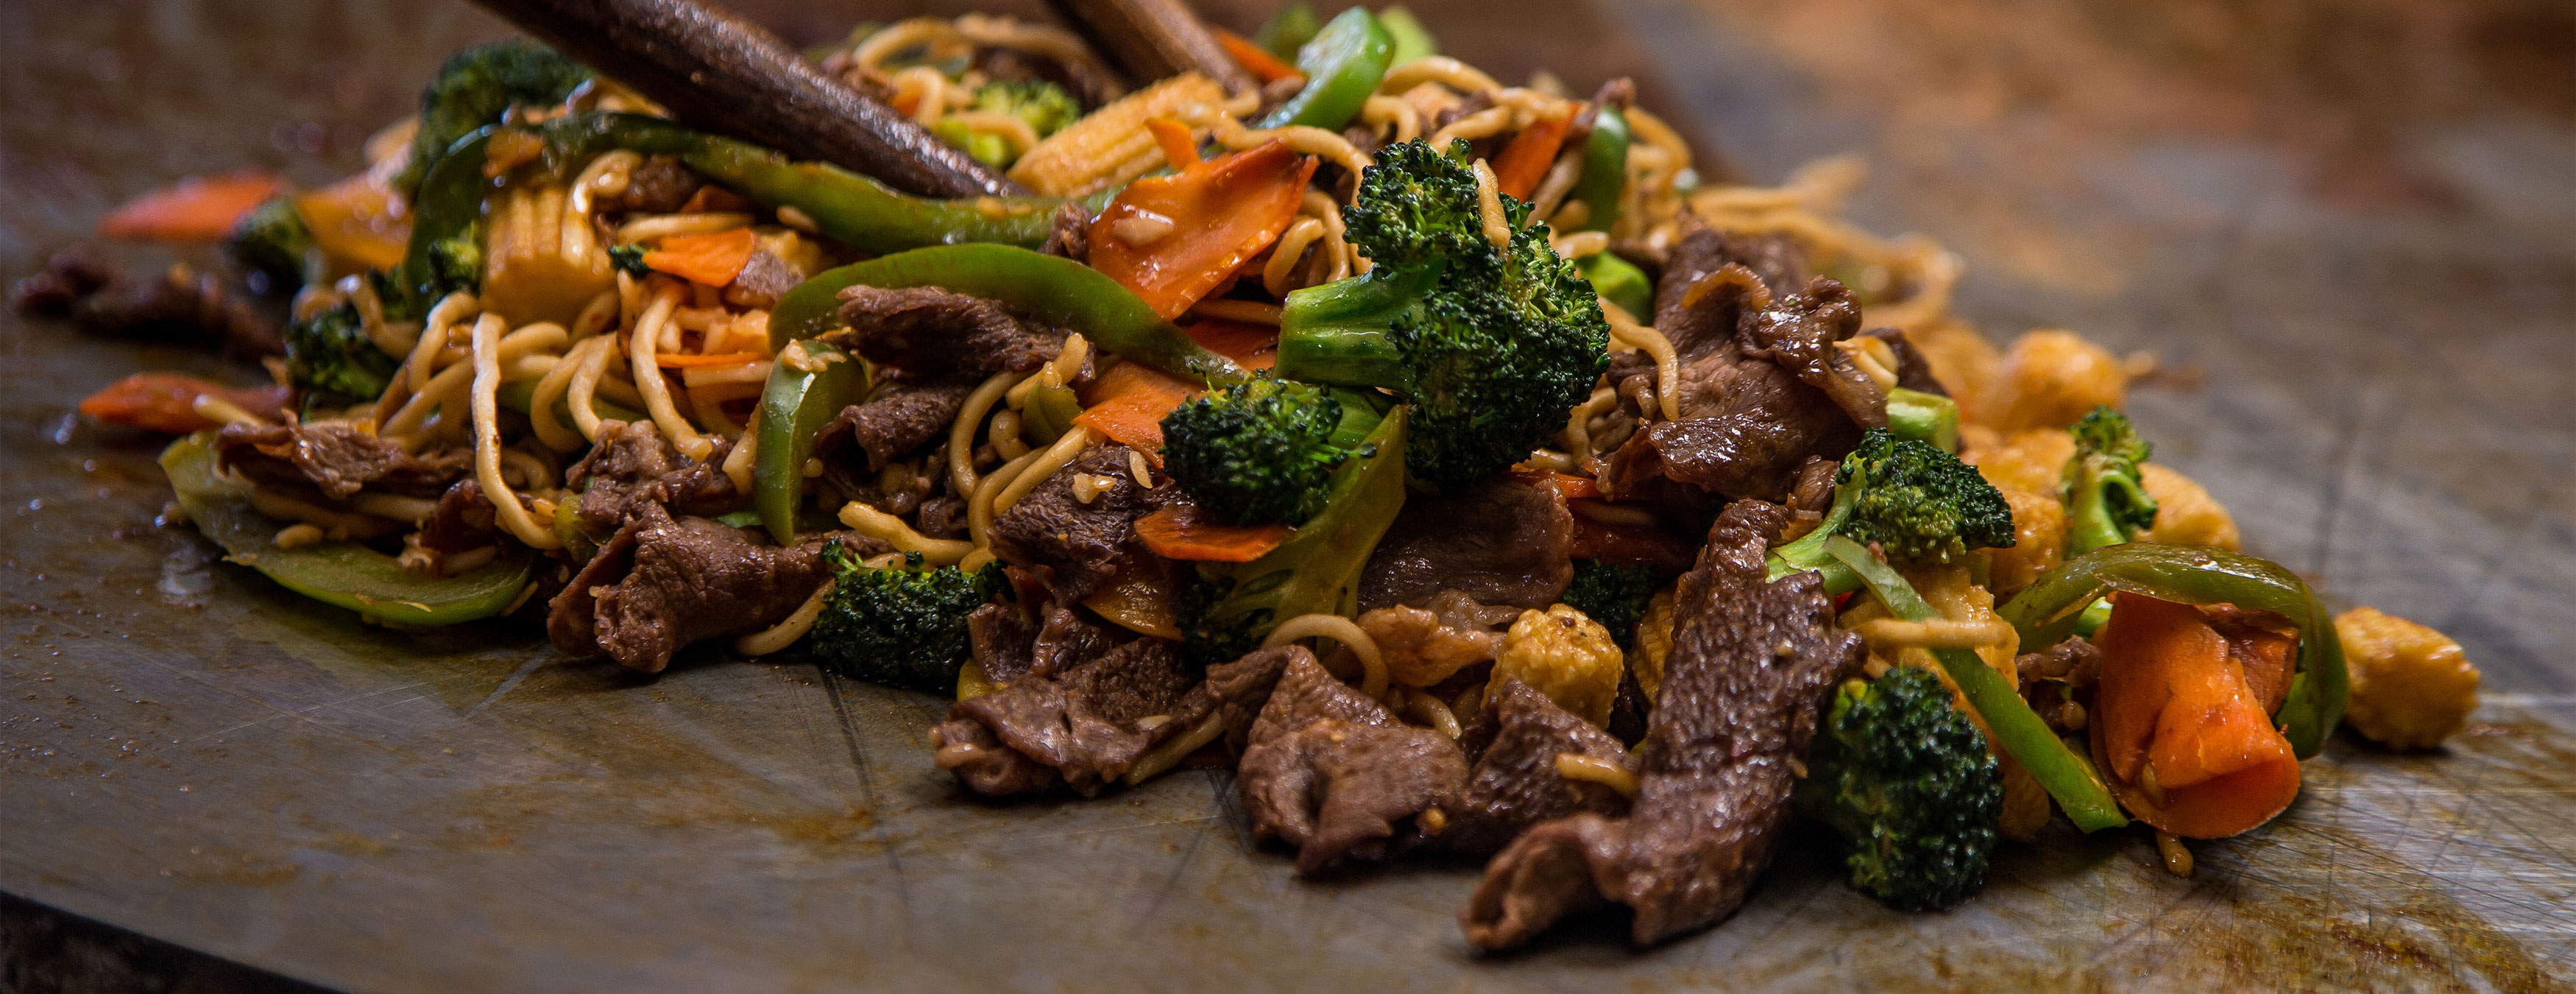 Noodles, veggies, and beef on the grill